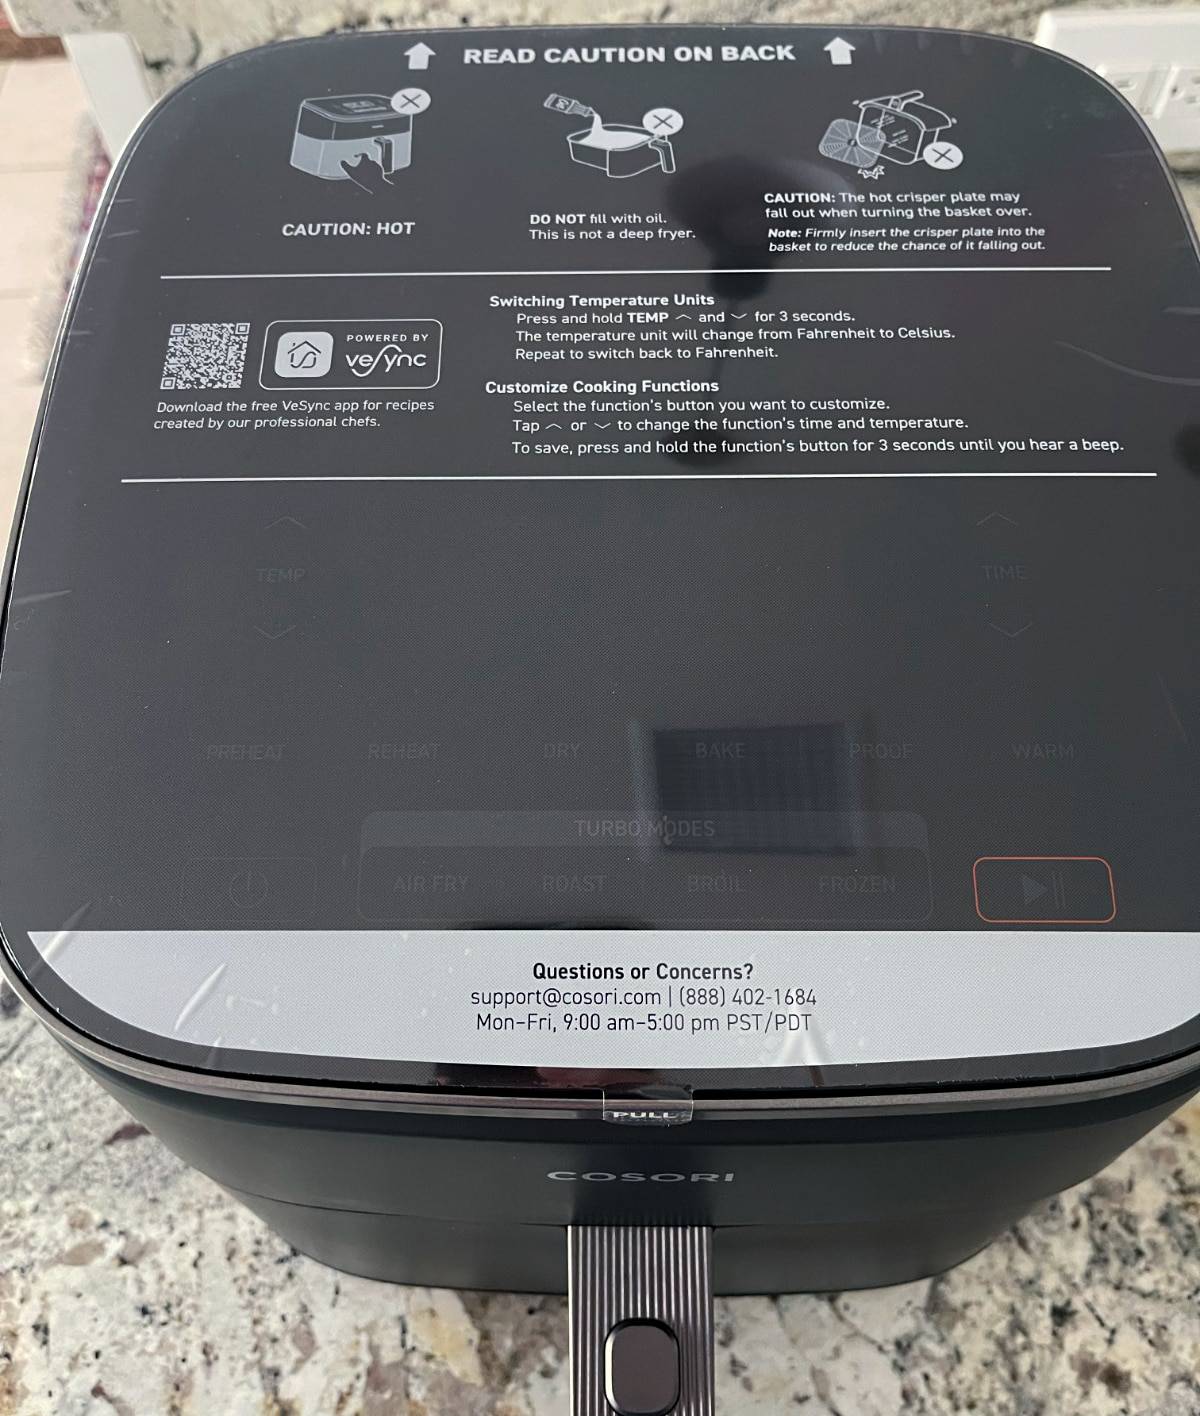 Cosori air fryer sticker with warnings and cautions for using the air fryer, along with a QR code for accessing an app with additional recipes, and information for contacting customer support.